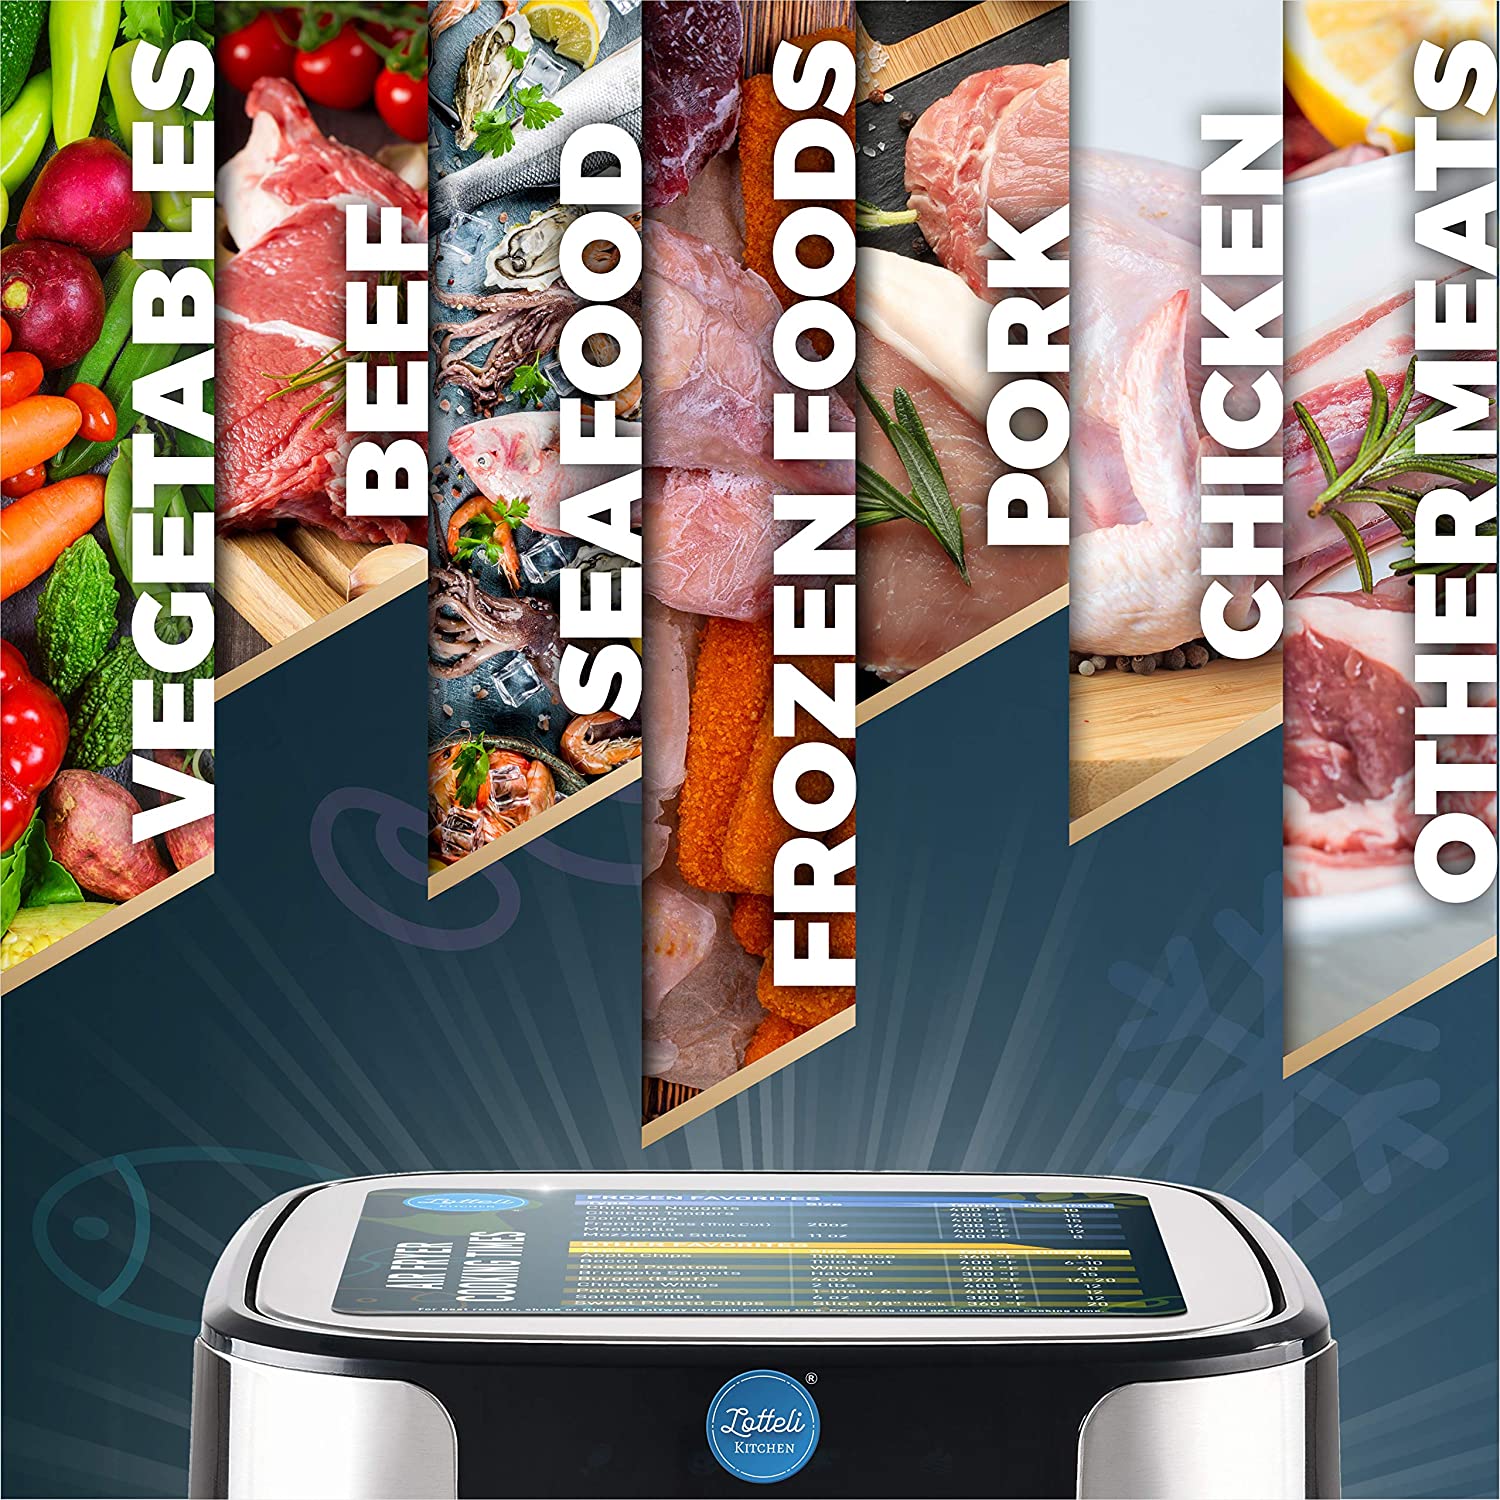 An air fryer with various food images in a collage above the fryer. The text reads, 'Vegetables, beef, seafood, frozen foods, pork, chicken, other meats.'